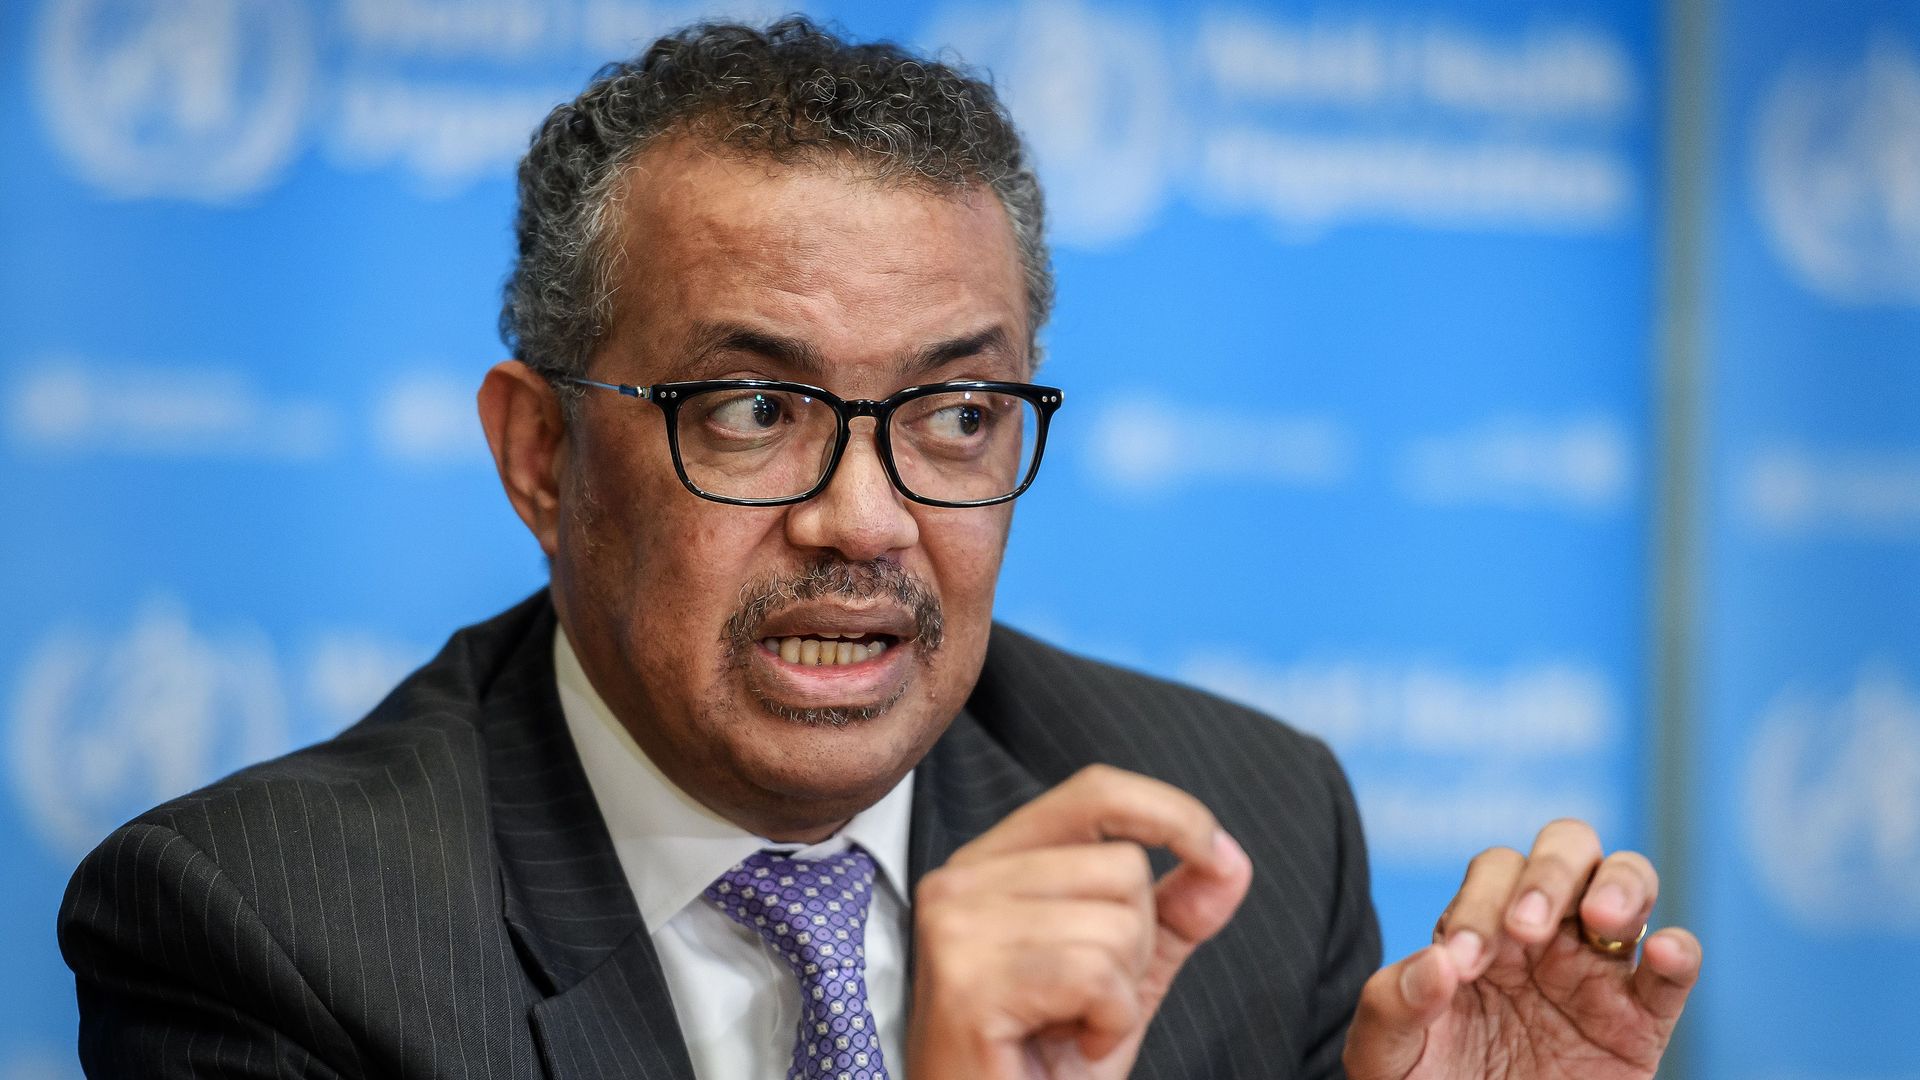 World Health Organization (WHO) Director-General Tedros Adhanom Ghebreyesus speaks during a daily press briefing on COVID-19 virus at the WHO headquaters in Geneva on March 9,